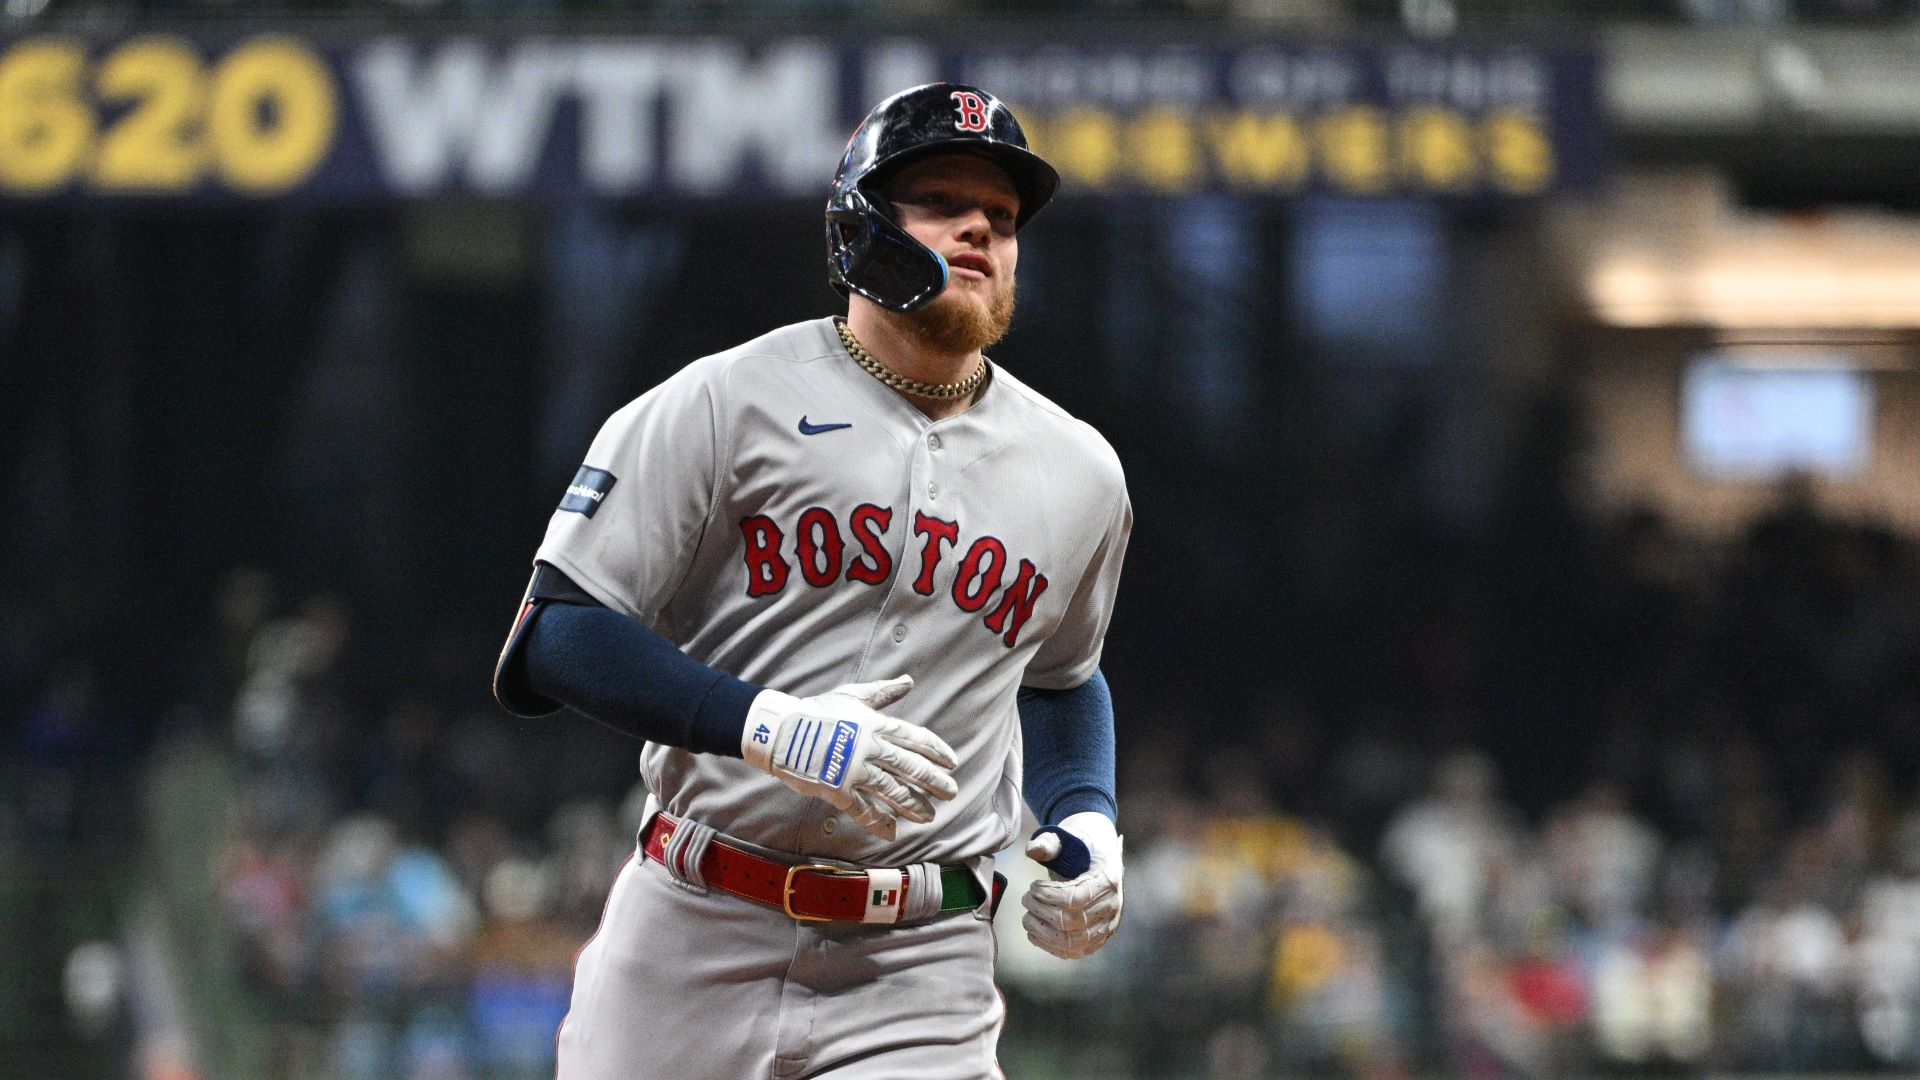 Verdugo's home run in the 9th gives the Red Sox a 5-4 win and a sweep of  the Blue Jays